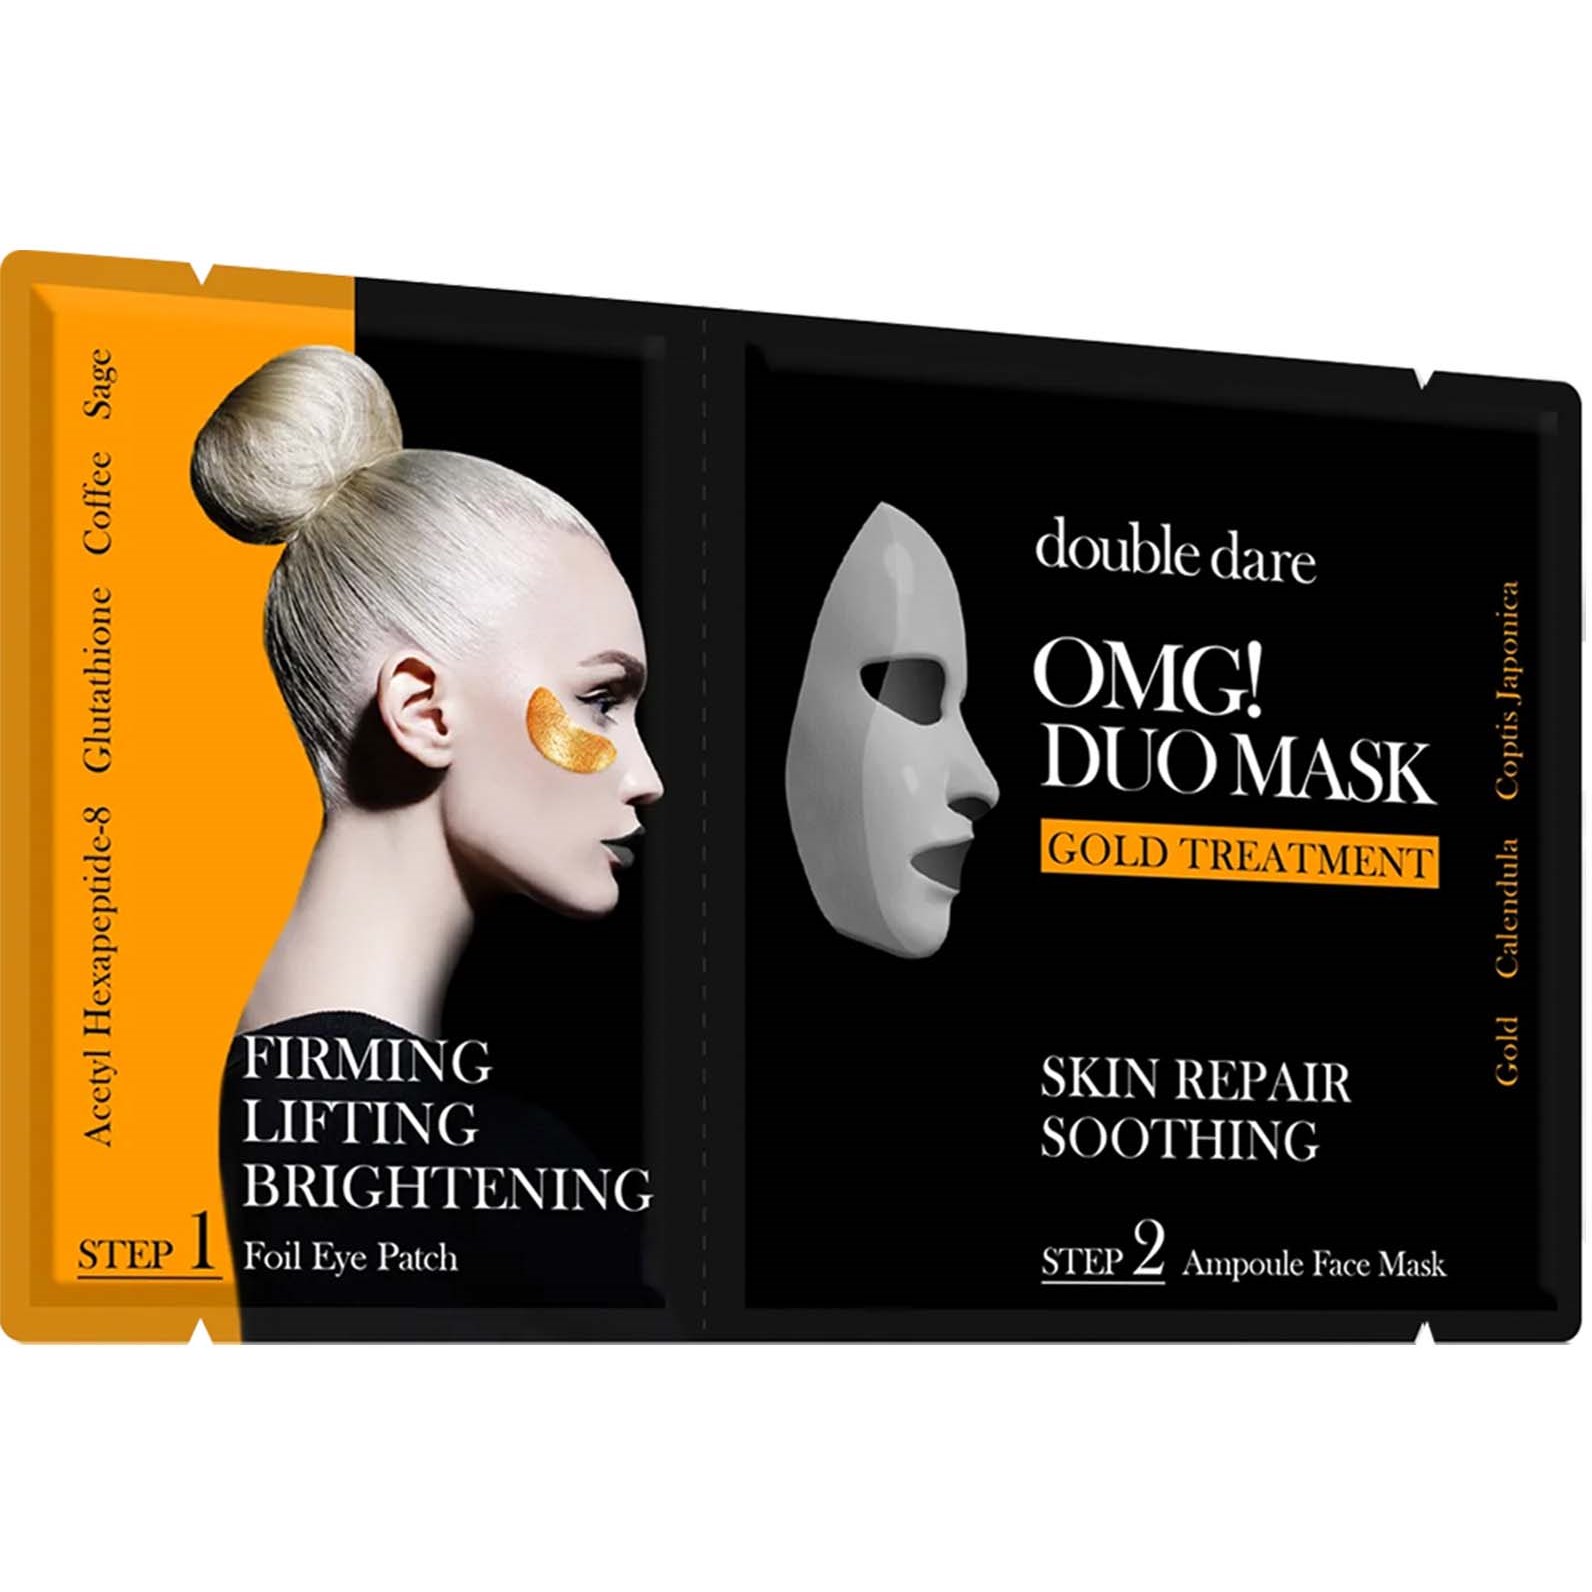 Läs mer om OMG! Double Dare Duo Mask Gold Treatment